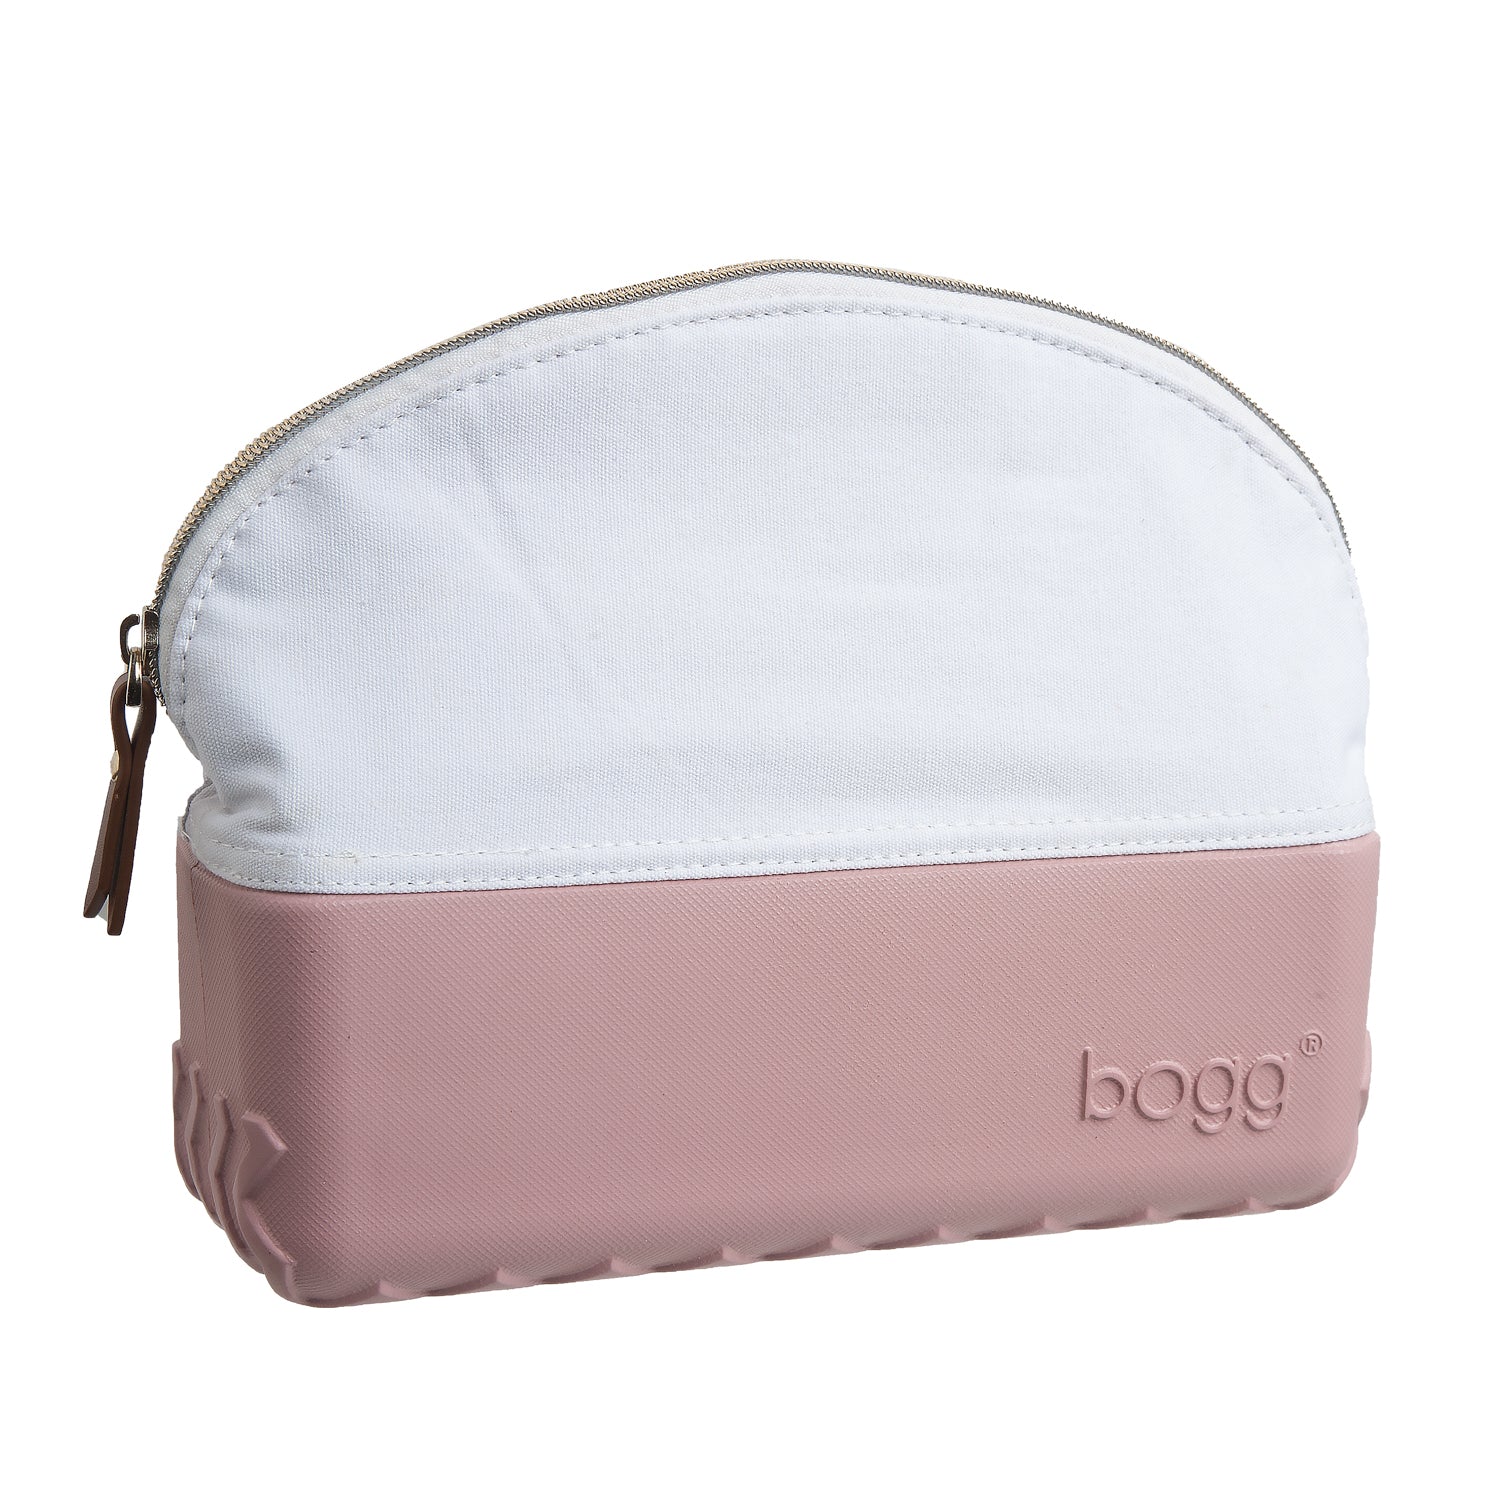 Beauty and The Bogg Cosmetic Bag - Blushing